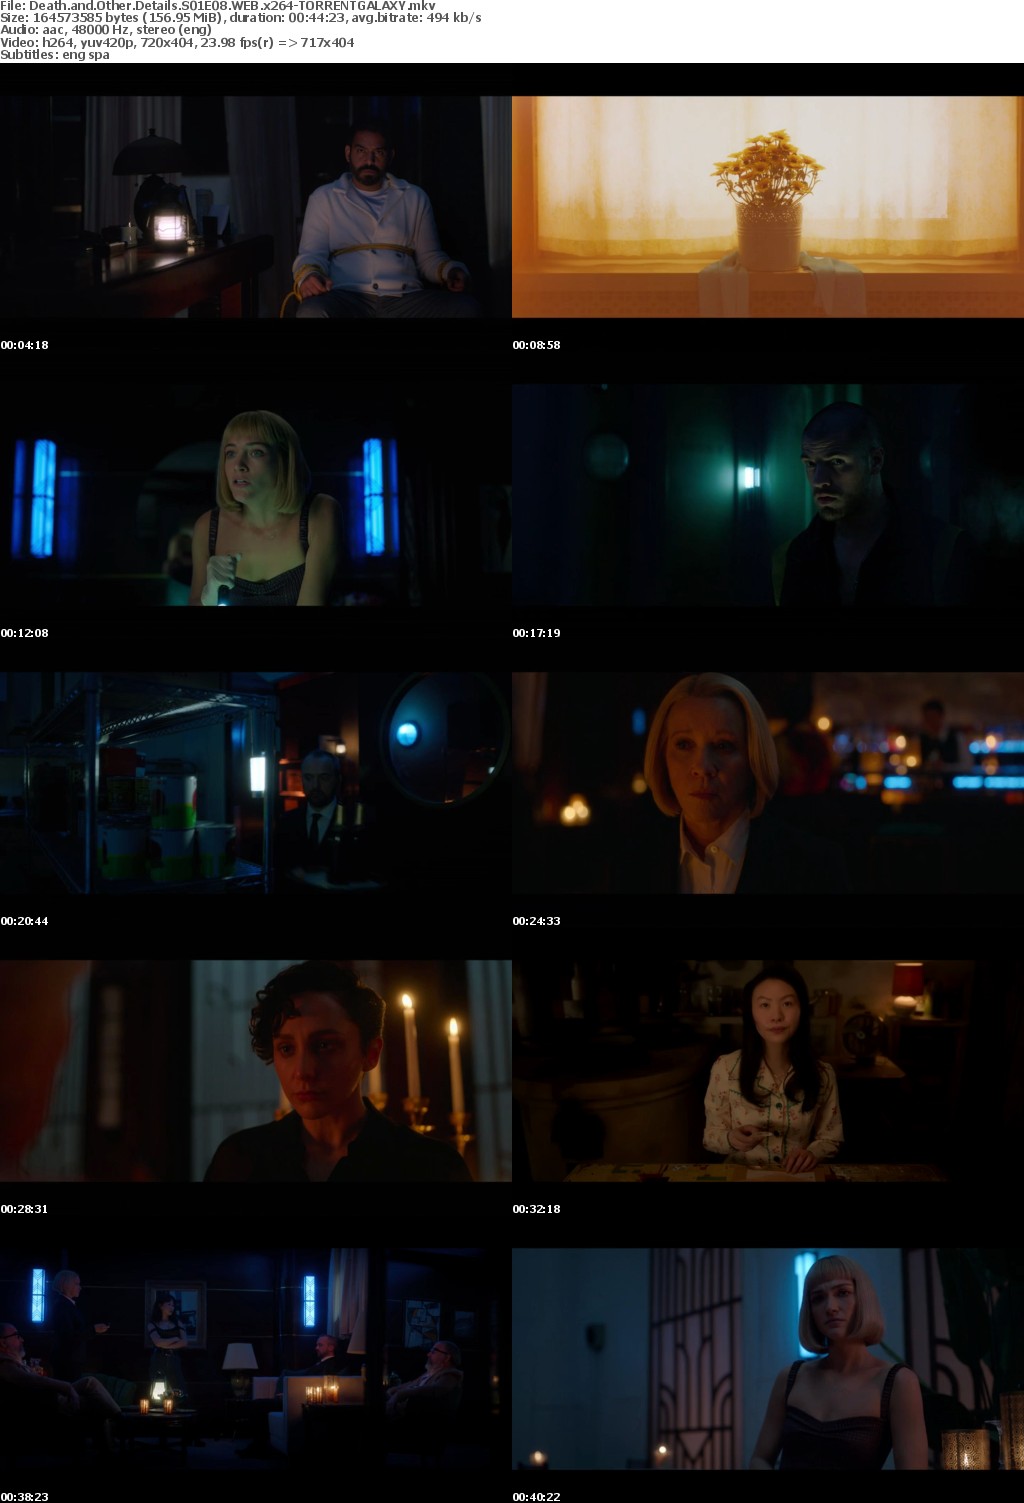 Death and Other Details S01E08 WEB x264-GALAXY